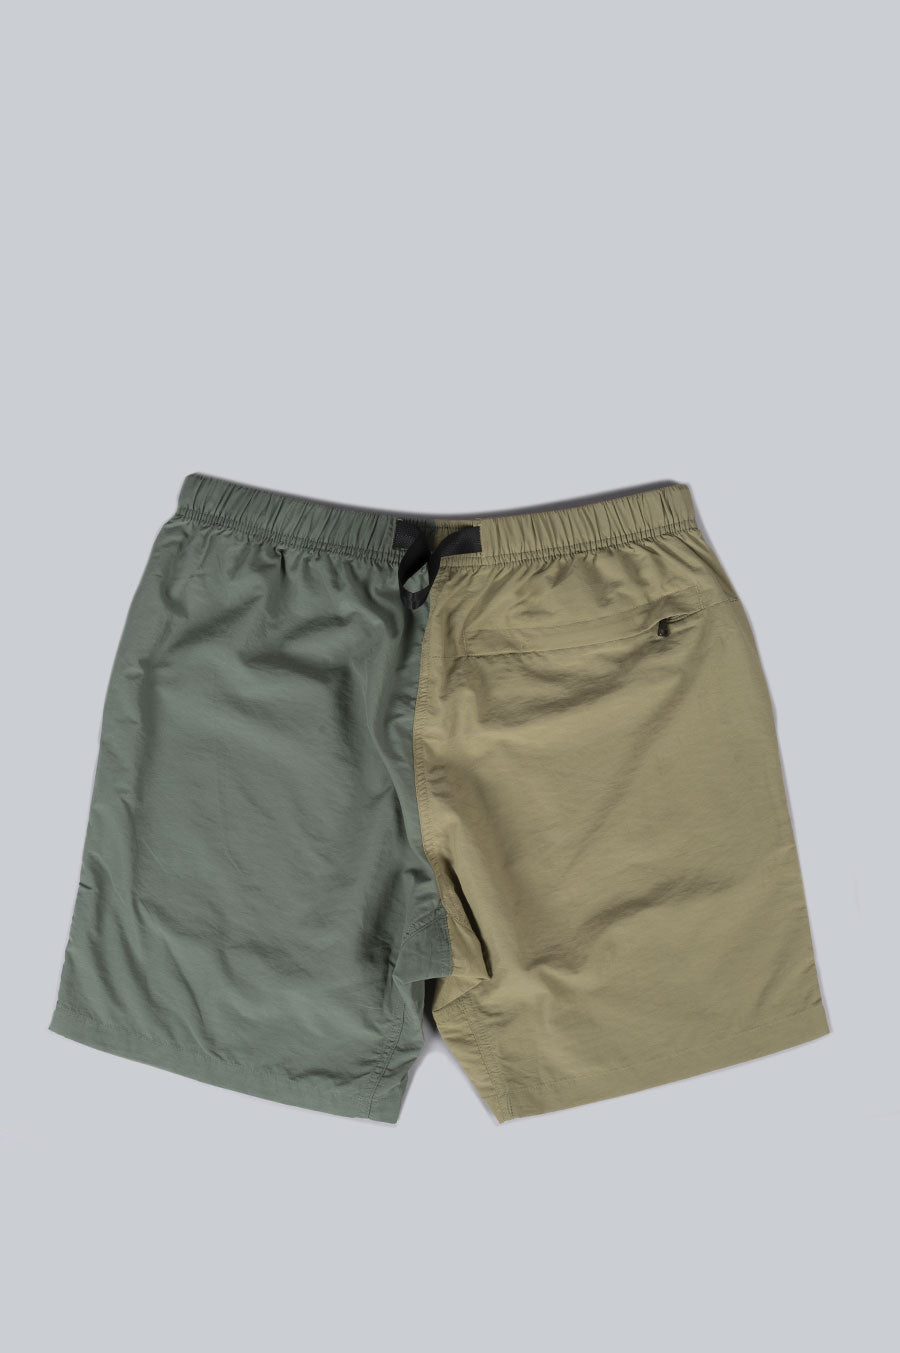 AFIELD OUT DUO TONE SIERRA CLIMBING SHORTS SAND SAGE